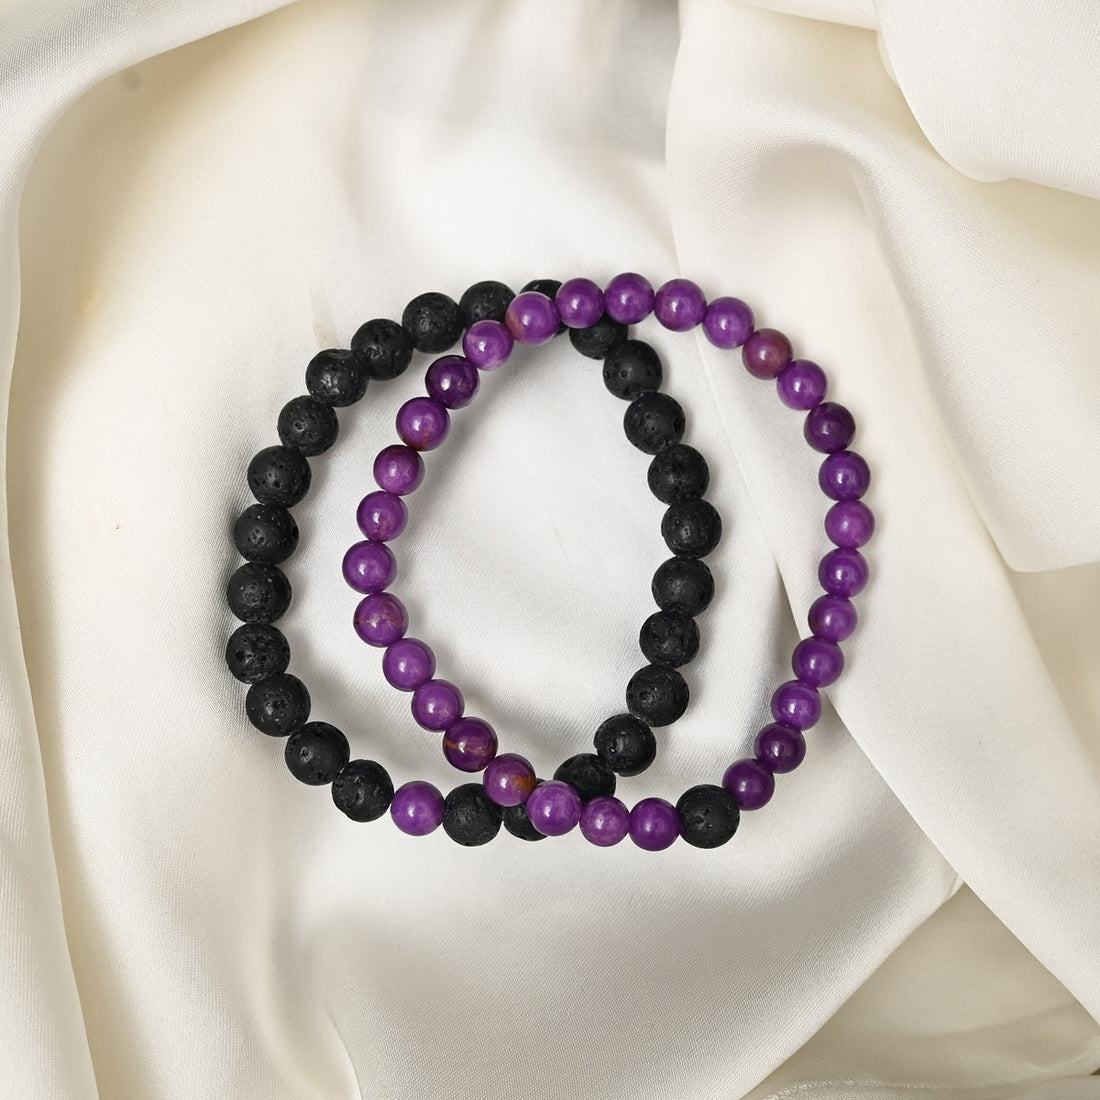 Detailed close-up showcasing the intricate beauty of Lepidolite's purple hues and the contrasting black Lava gemstones.